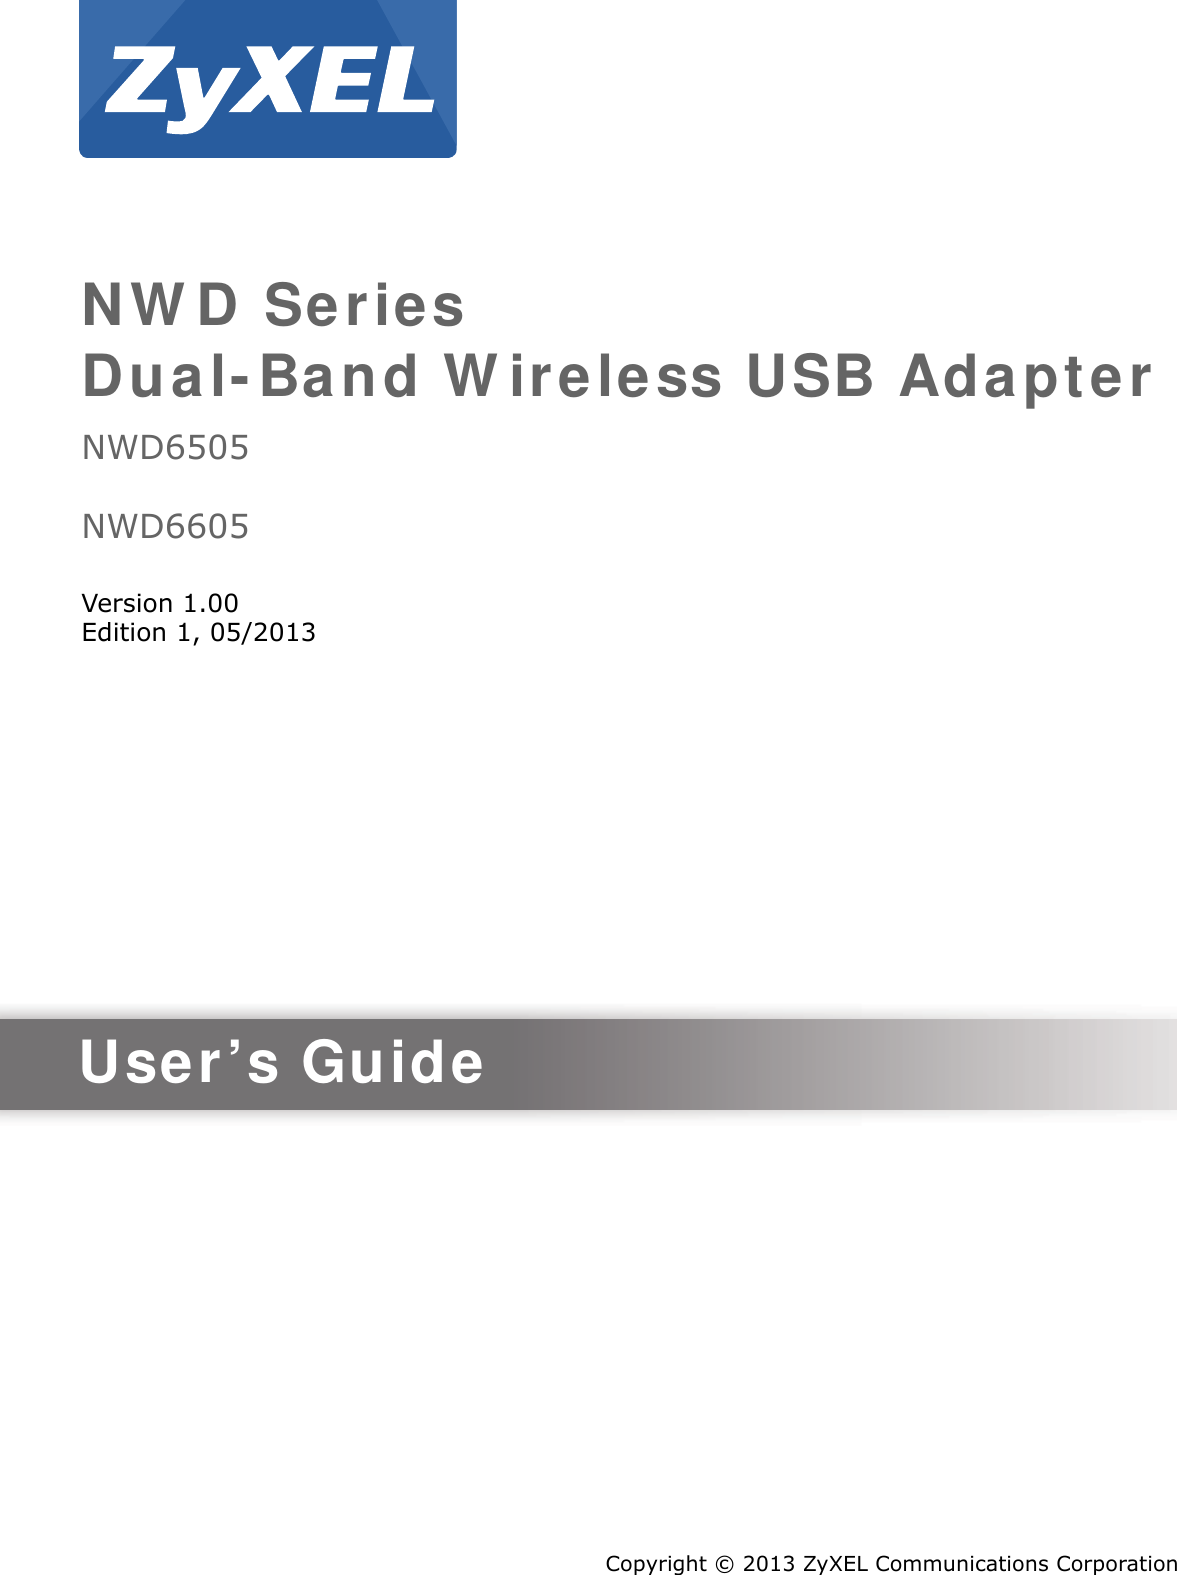 Quick Start Guidewww.zyxel.comNWD SeriesDual-Band Wireless USB AdapterNWD6505NWD6605Version 1.00Edition 1, 05/2013Copyright © 2013 ZyXEL Communications CorporationUser’s Guide